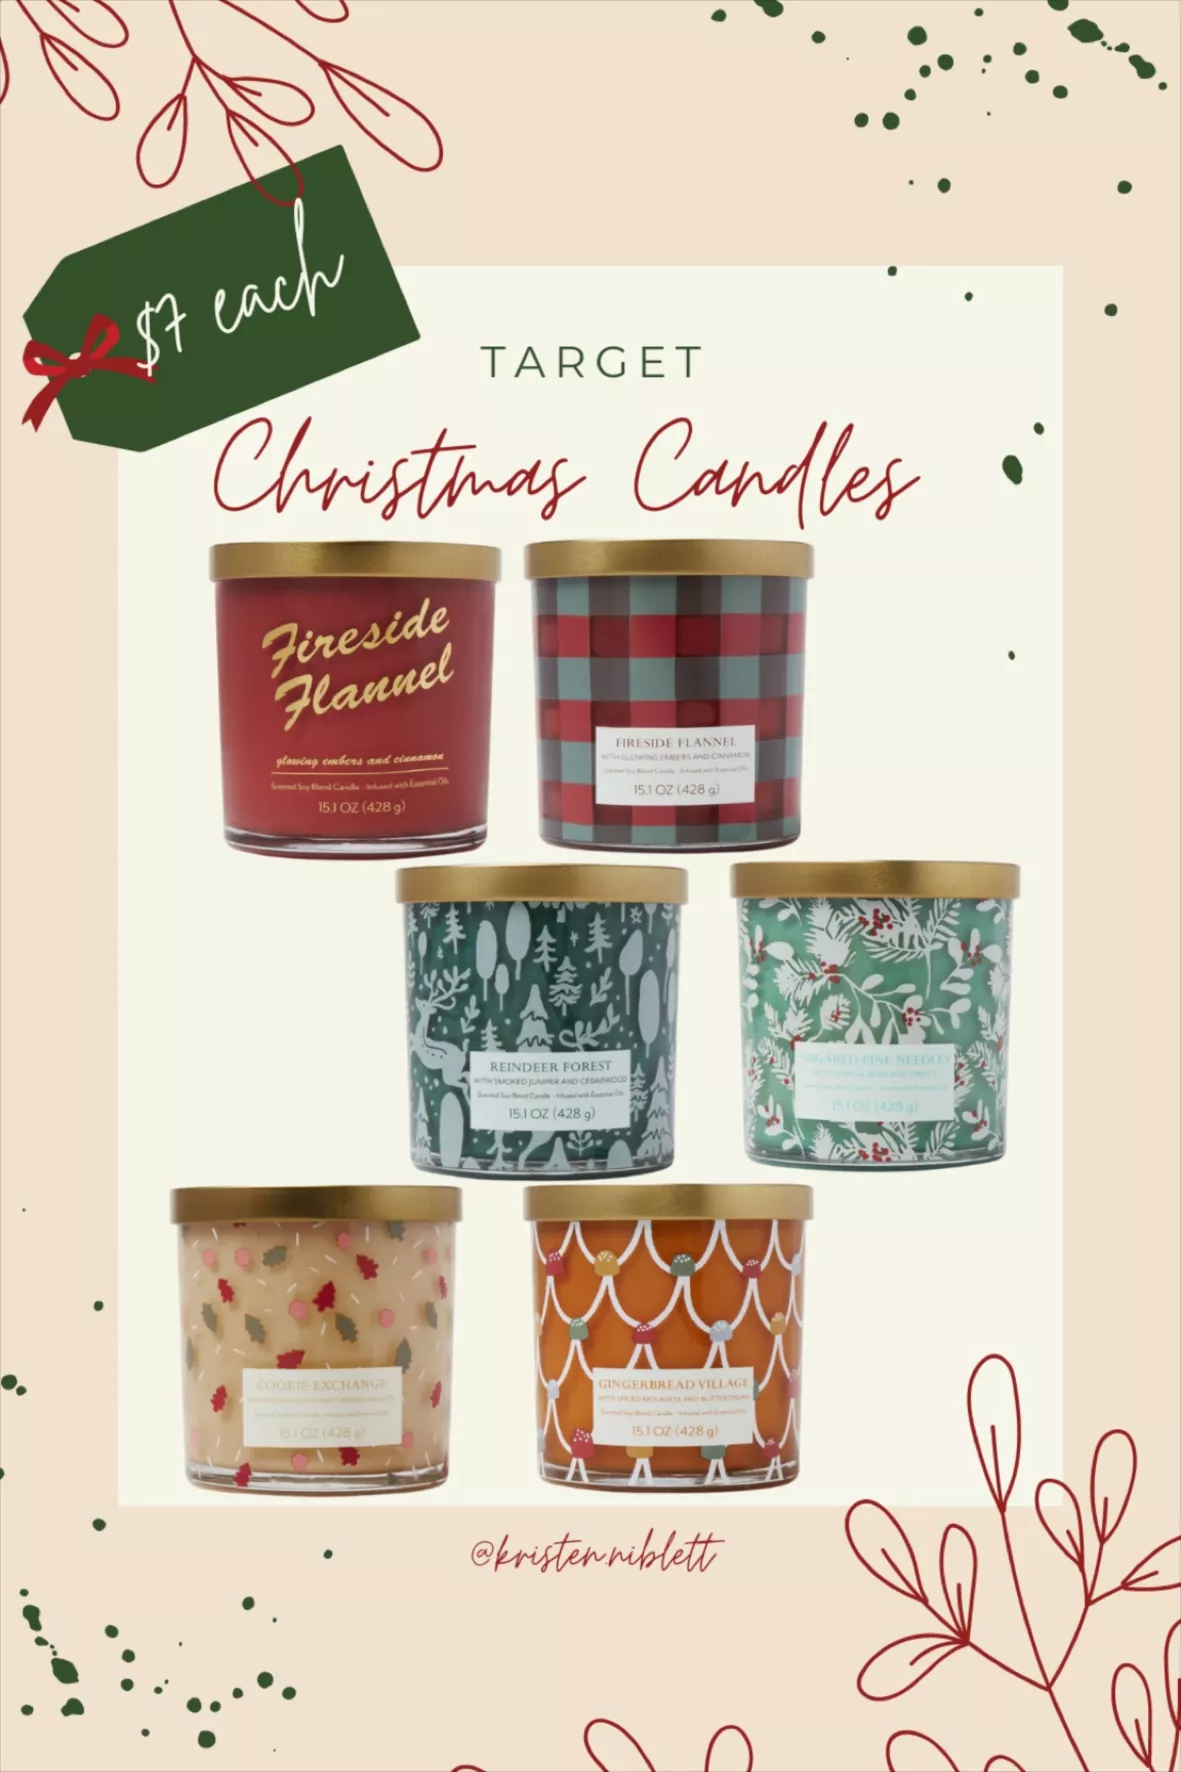 Smells Like] Christmas 4 oz. Just Because Candle Tin – Paper Luxe